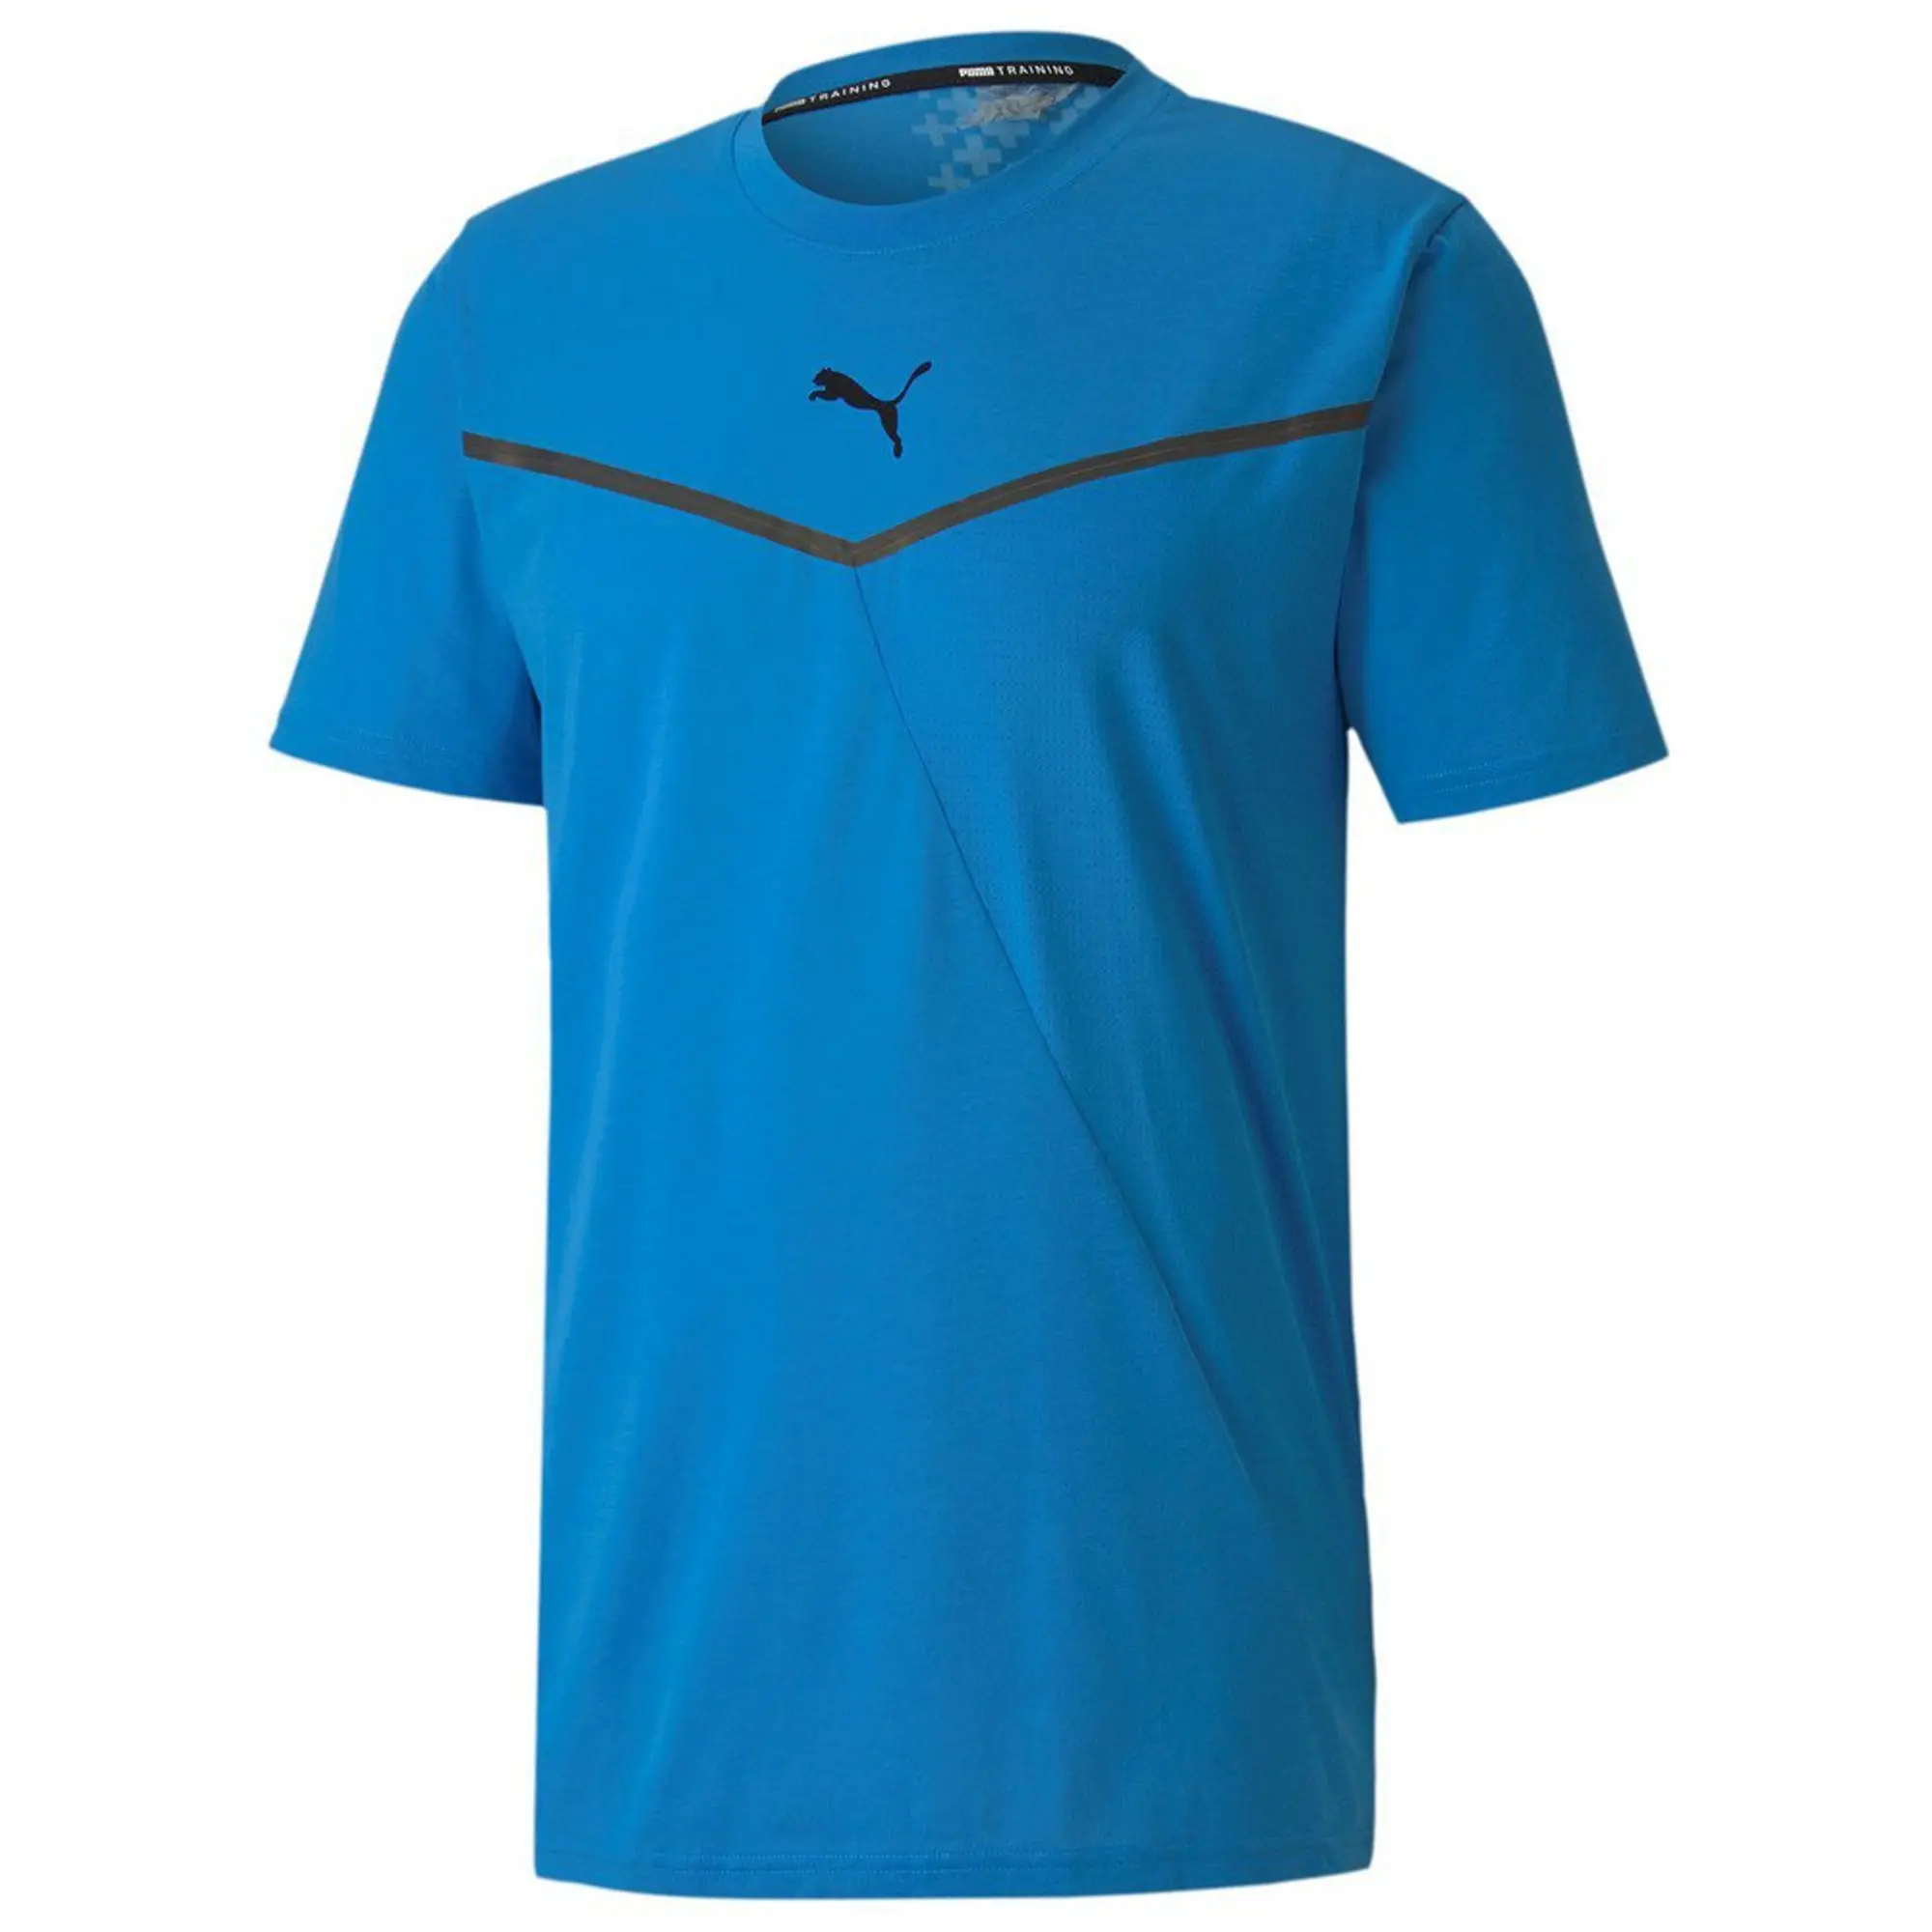 Puma Dry Cell Thermo R+ BND Running Short Sleeve Crew Neck Blue Mens Tee 519400 03